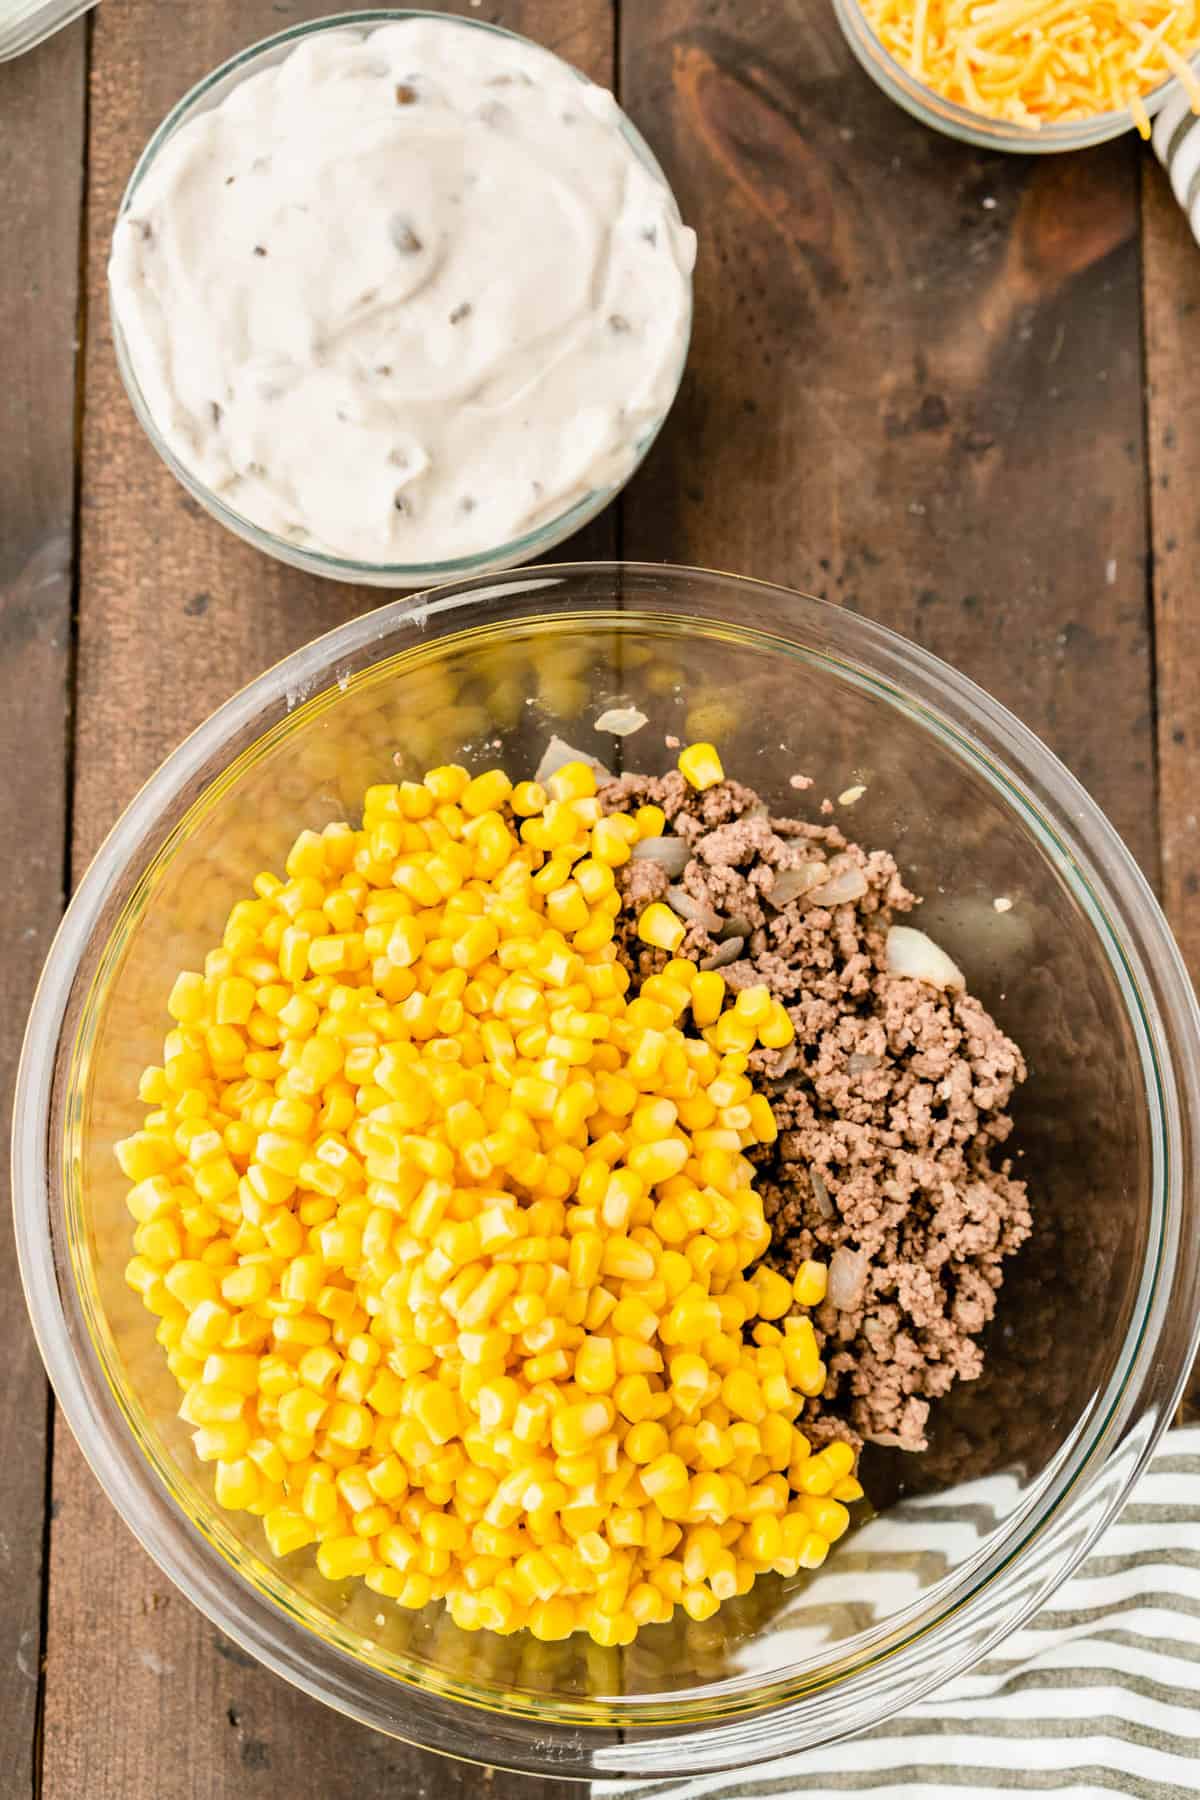 Adding canned corn to ground beef mixture in bowl for Tator Tot Hotdish recipe